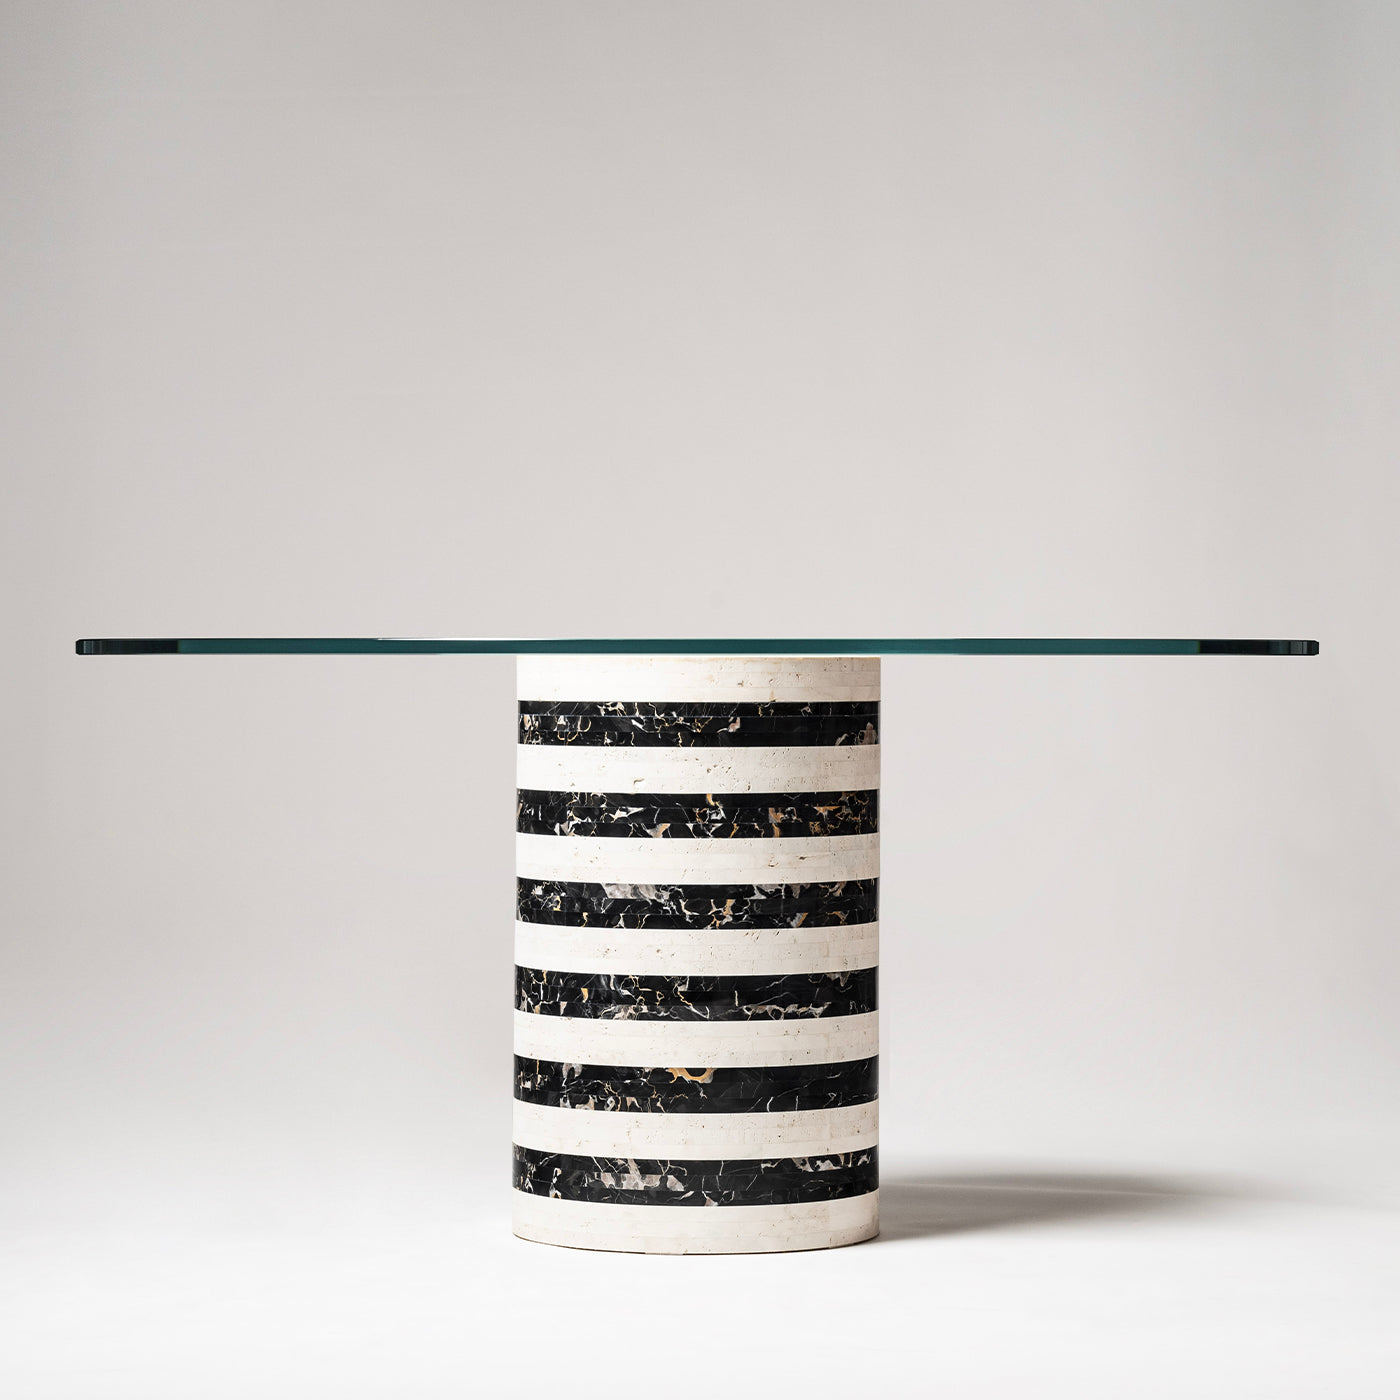 Architexture Living Table 02 by Patricia Urquiola - Alternative view 1